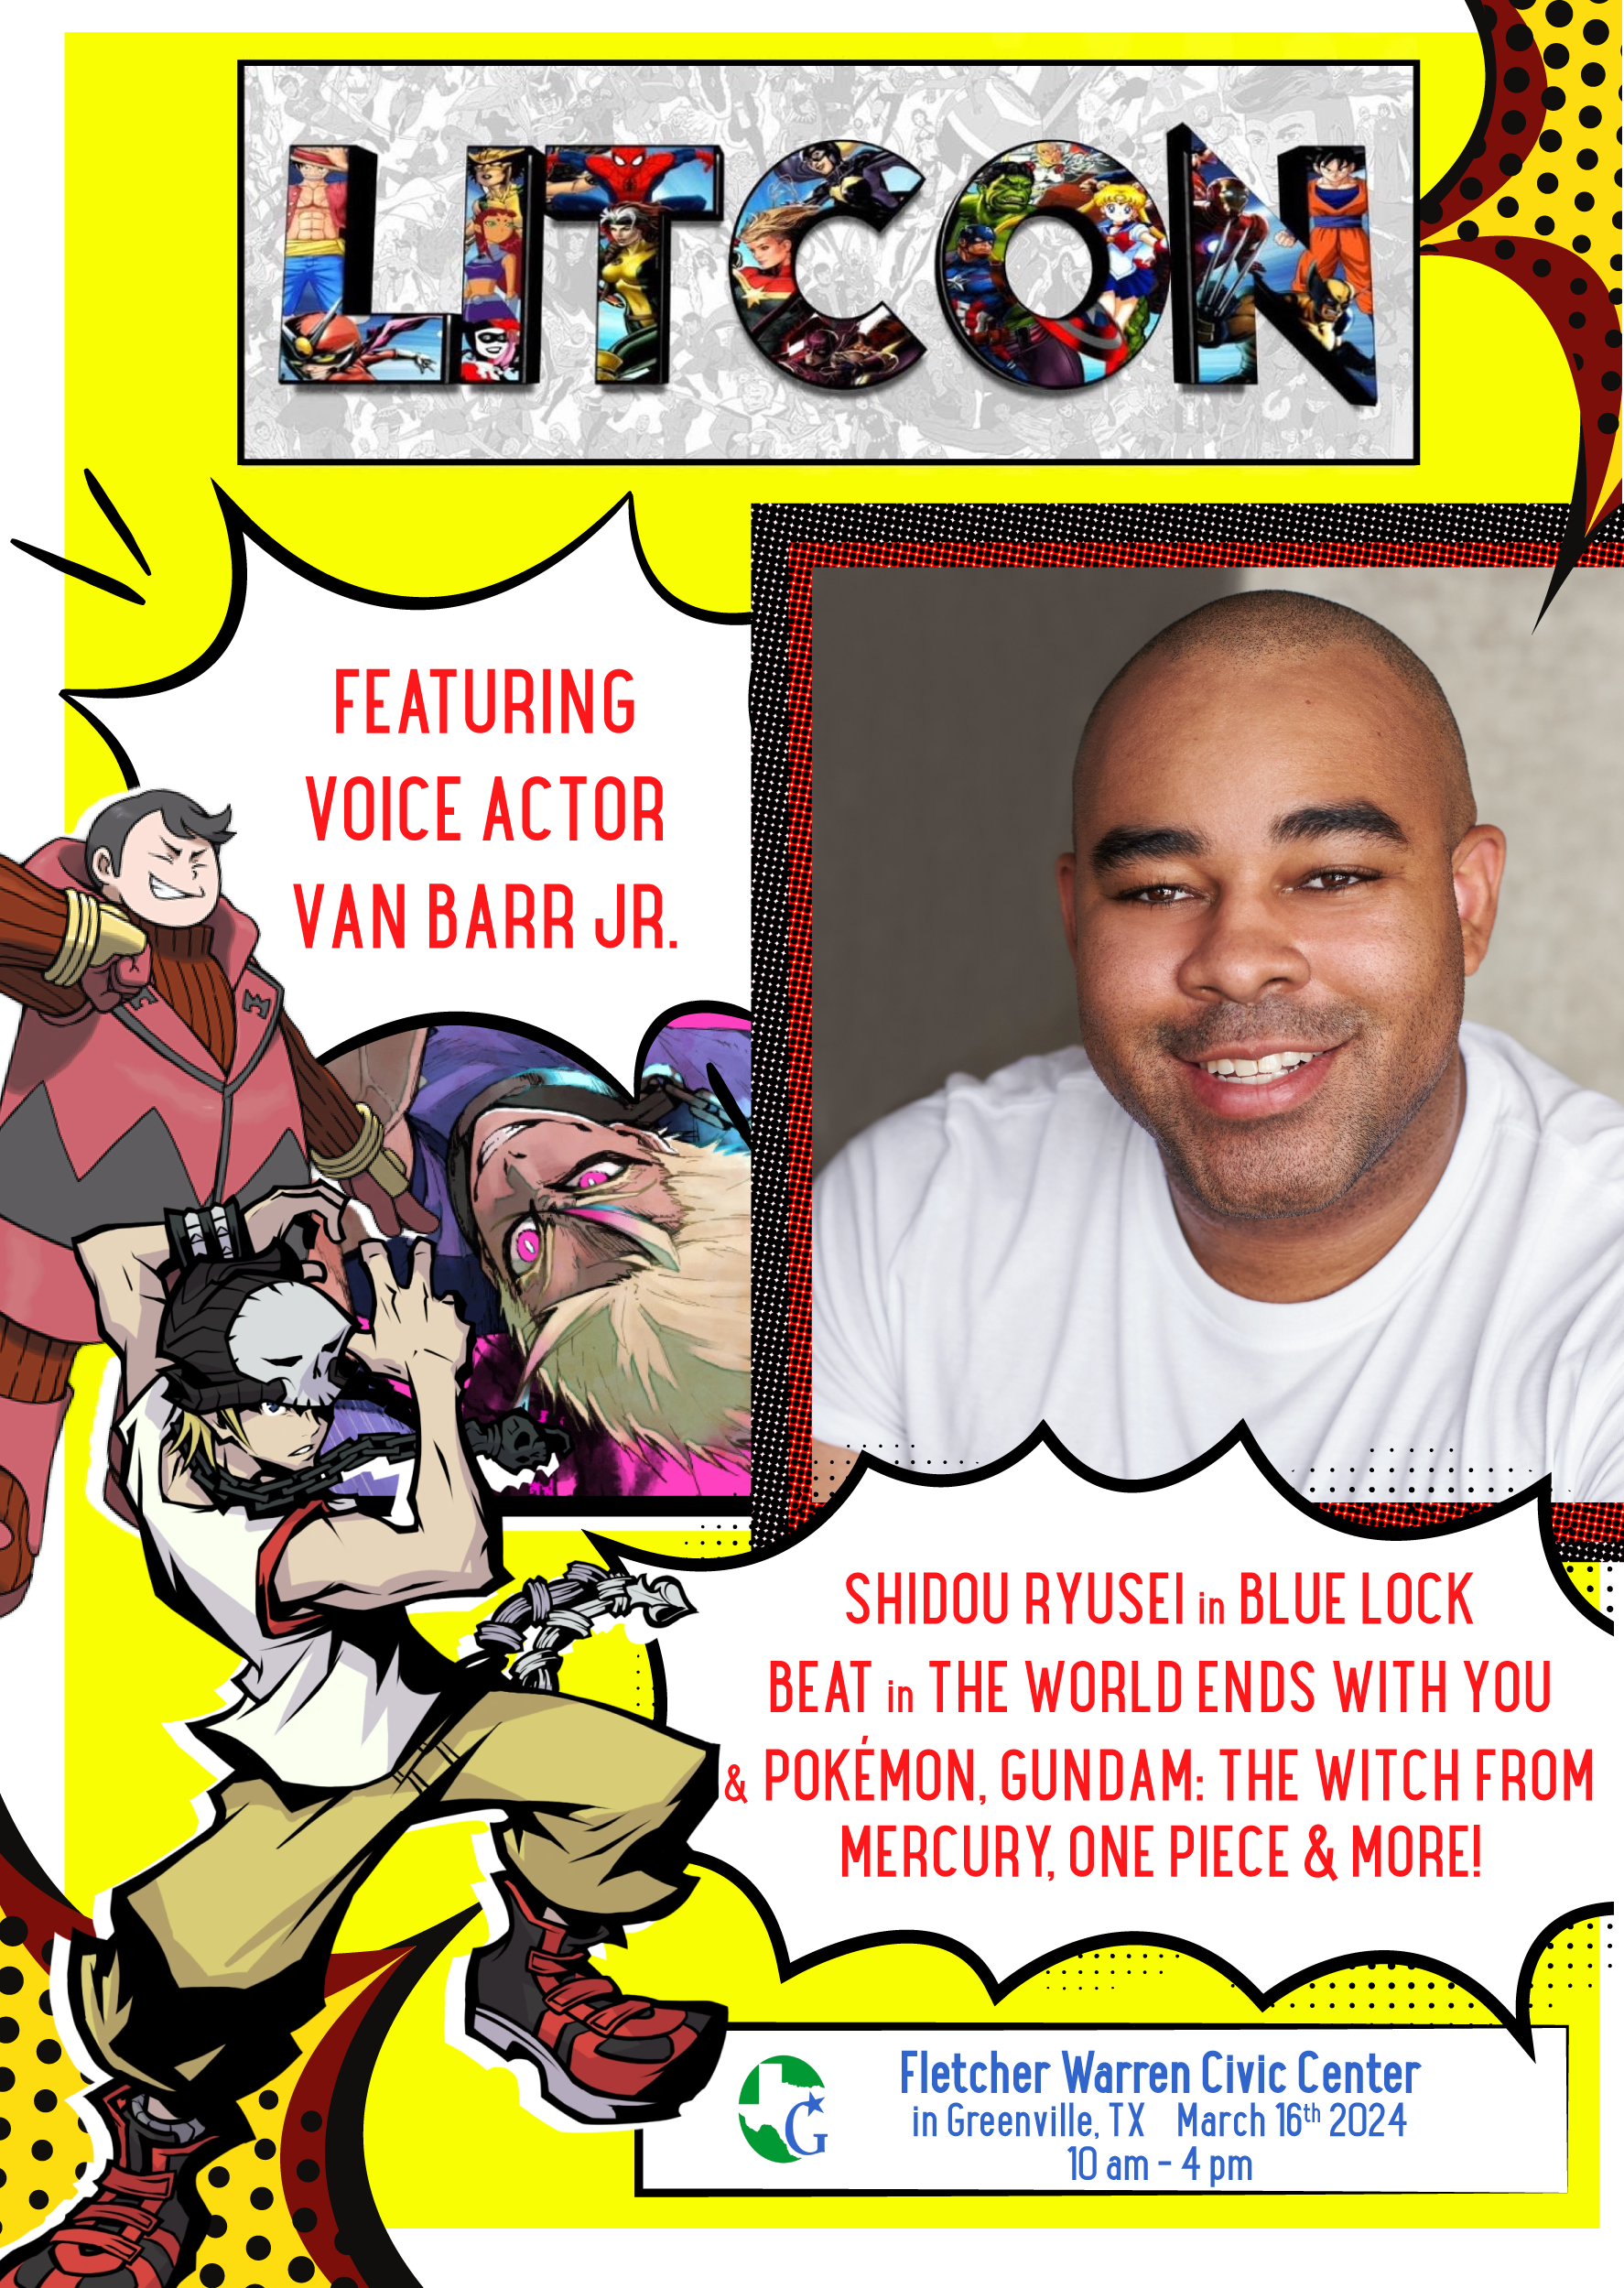 Van Barr Jr will be appearing at LITCON as a guest on March 16th, 2024 at the Fletcher Warren Civic Center in Greenville.